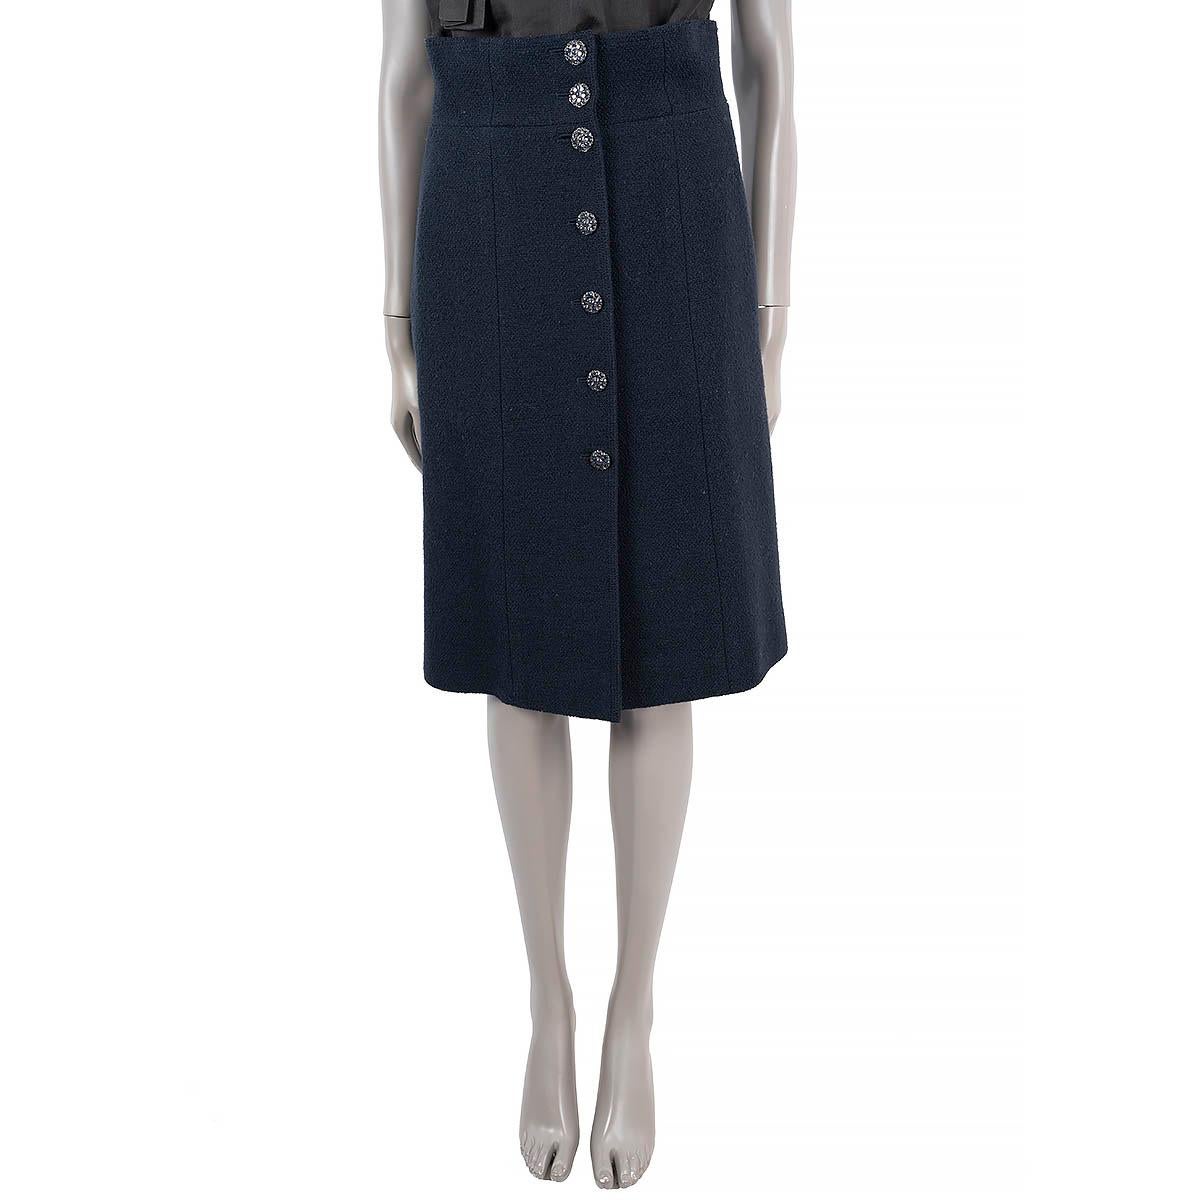 100% authentic Chanel tweed skirt in navy blue wool (100%). Features two pockets on the side and seven Gripoix flower button on the front. Lined in navy blue silk (100%). Has been worn and is in excellent condition.

2015 Paris-Dubai Resort